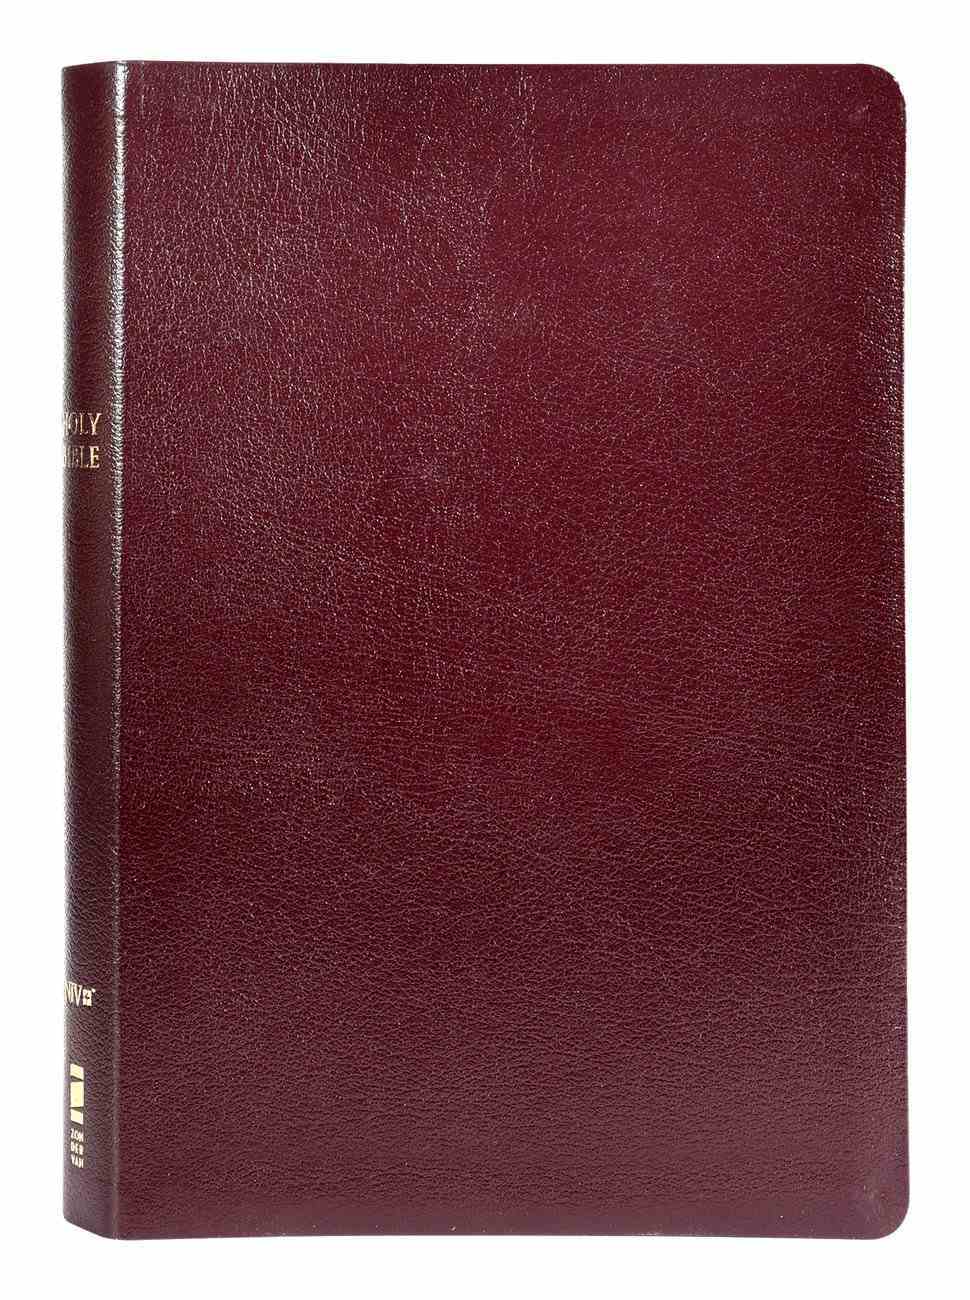 NIV Thinline Reference Bible Large Print Burgundy (Red Letter Edition) Bonded Leather